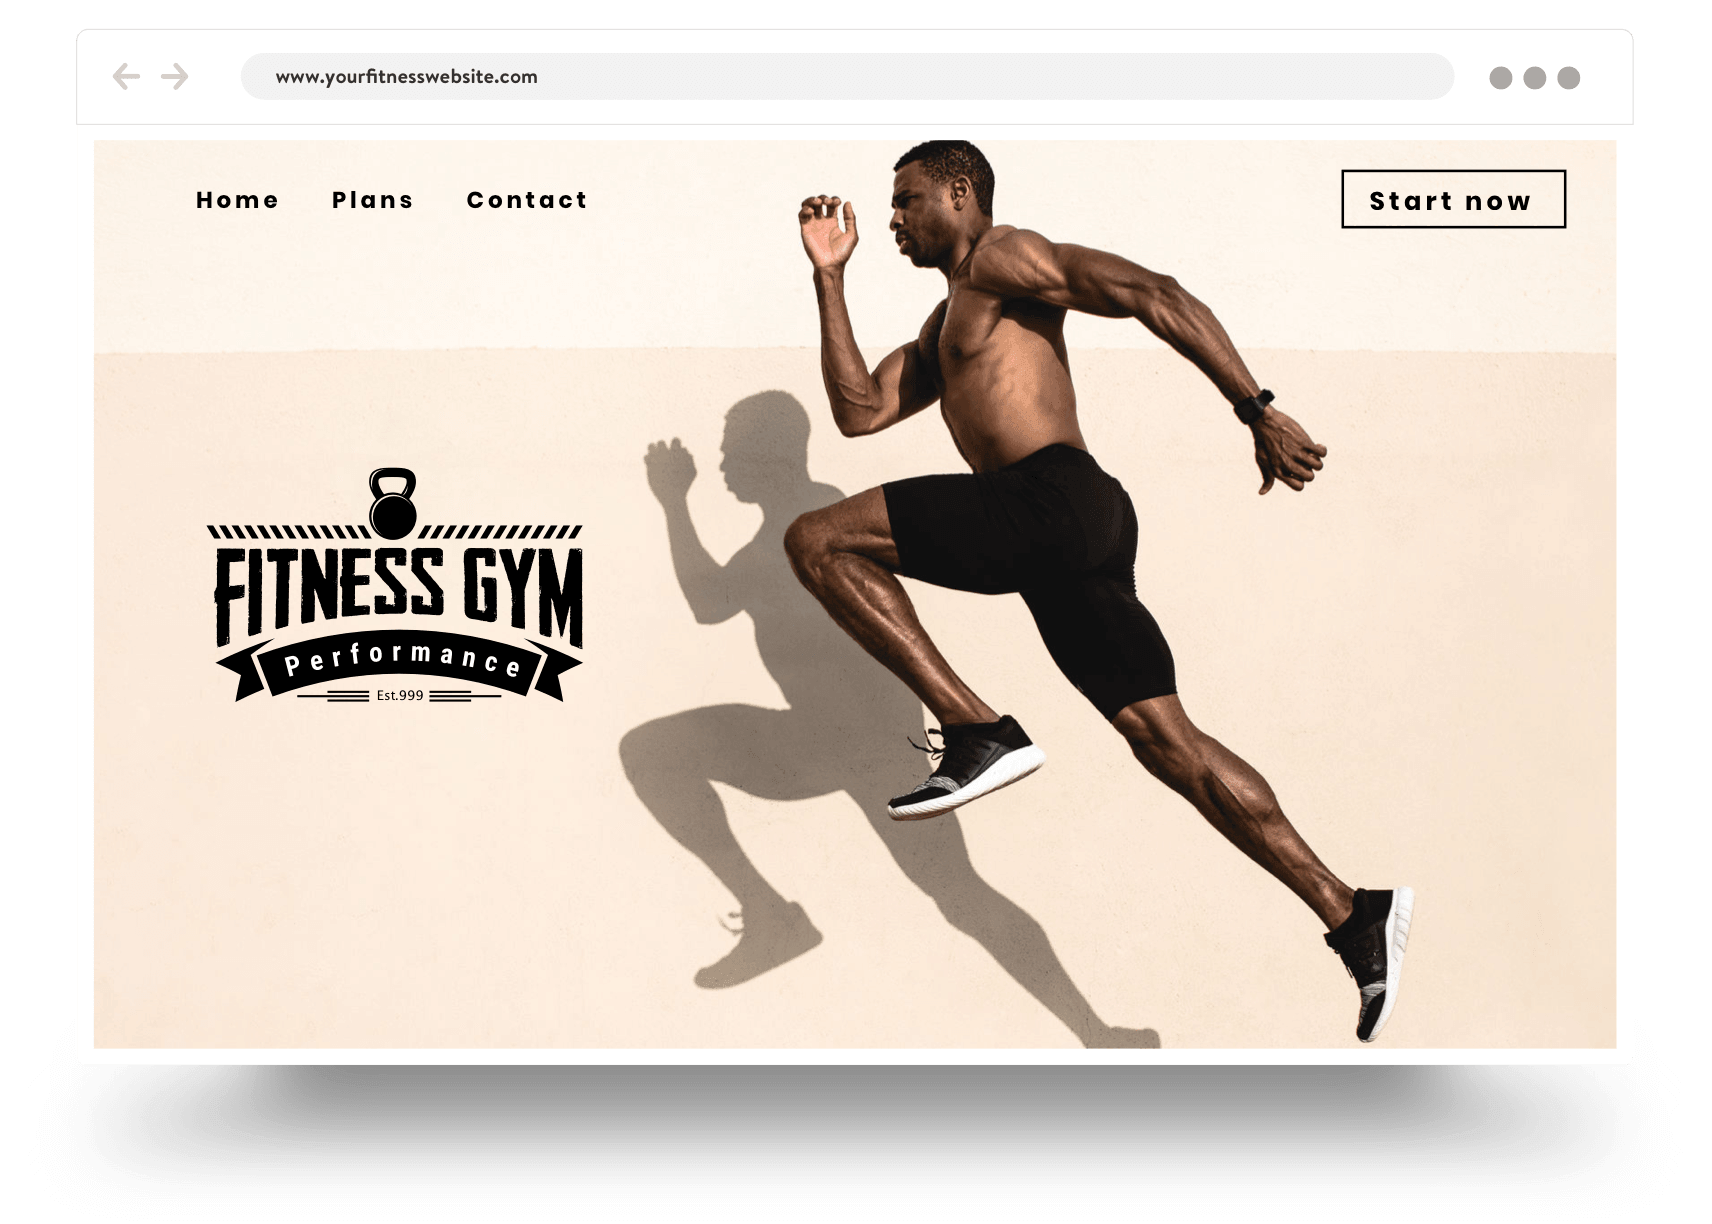 Example of a fitness gym website built with Jimdo showing a man sprinting